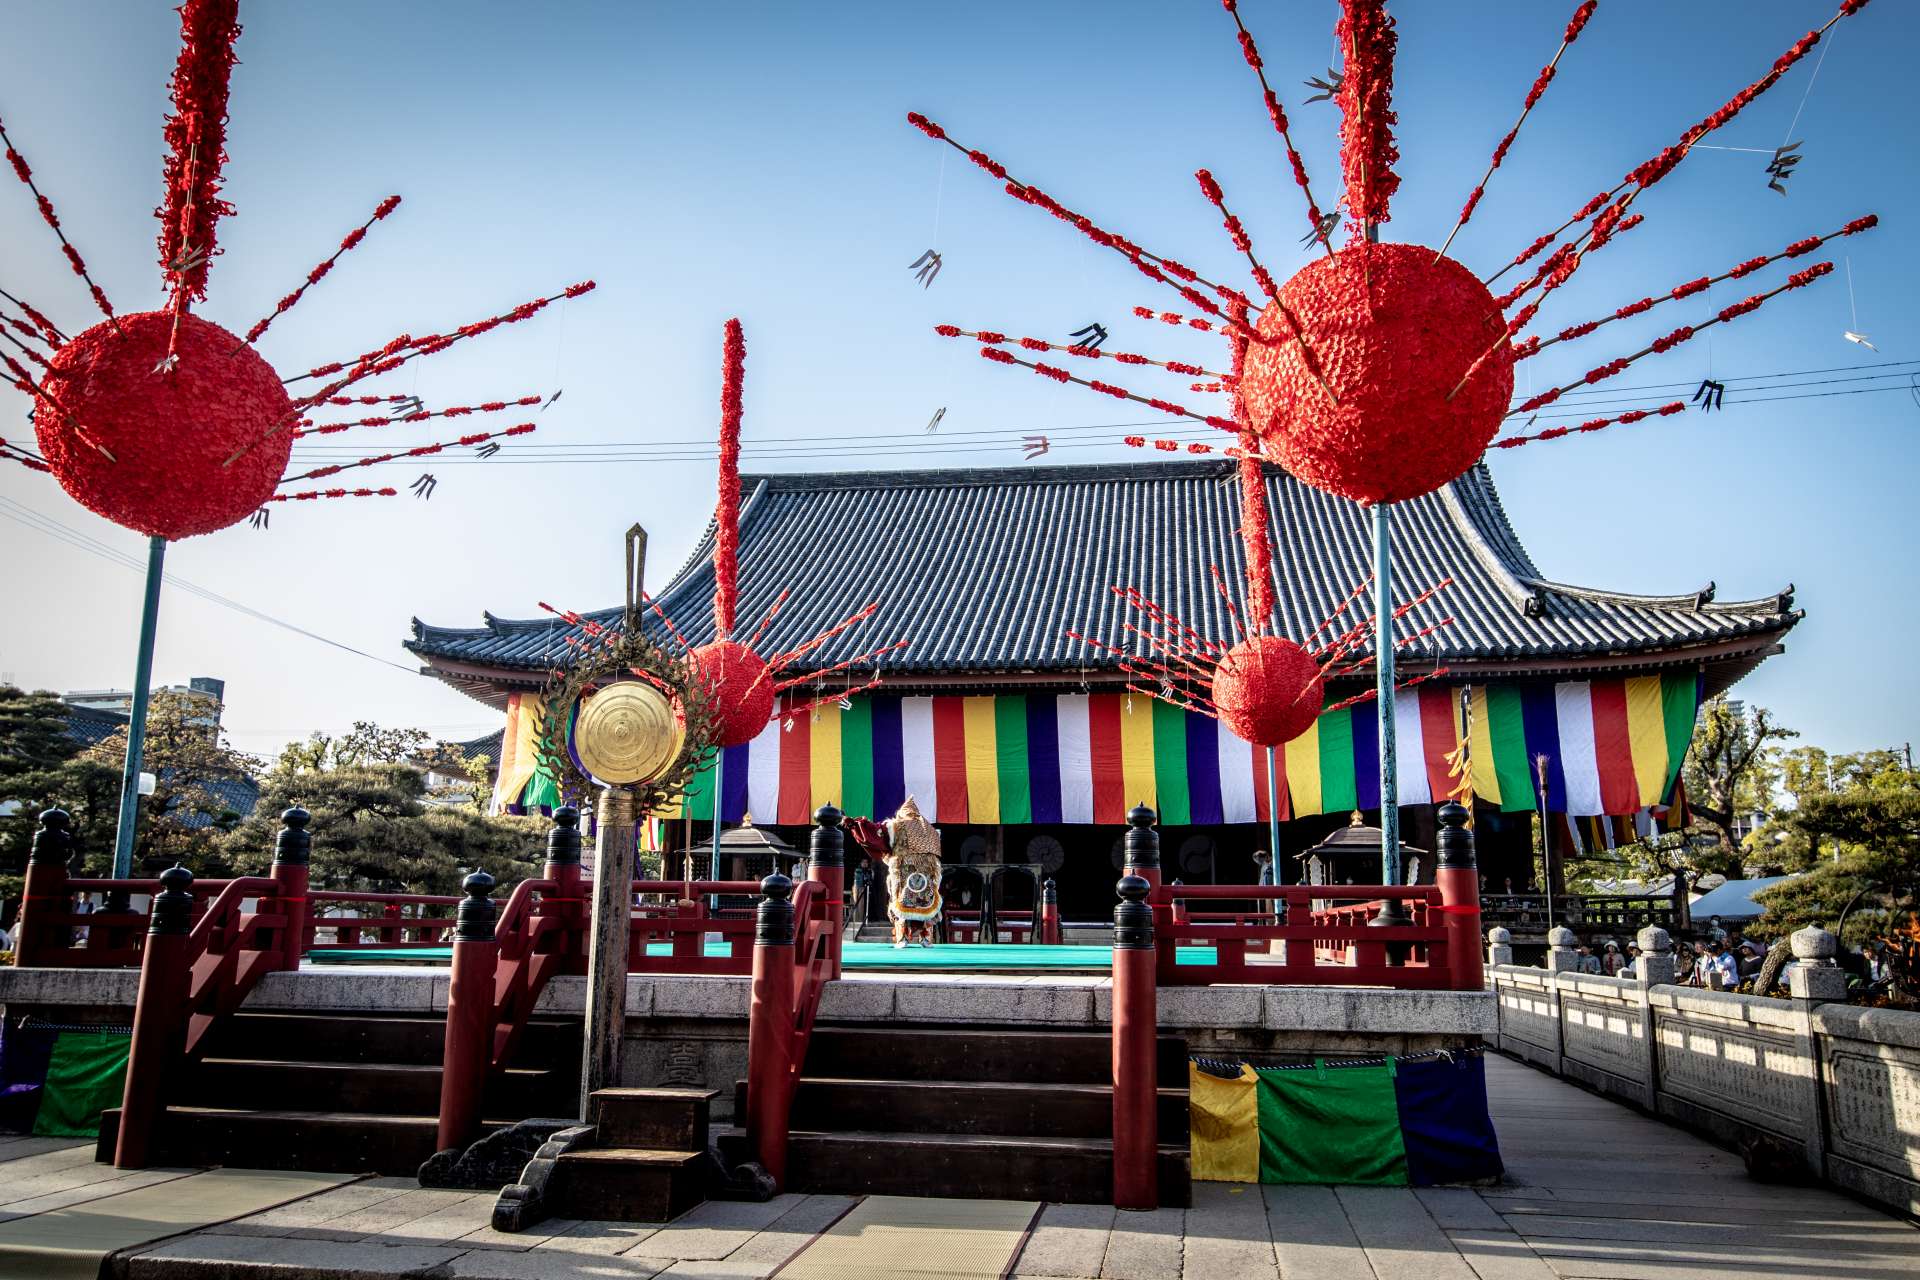 The stone stage in front of Rokuji-do Hall. The red balls decorating the four corners of the stage represent red spider lilies.